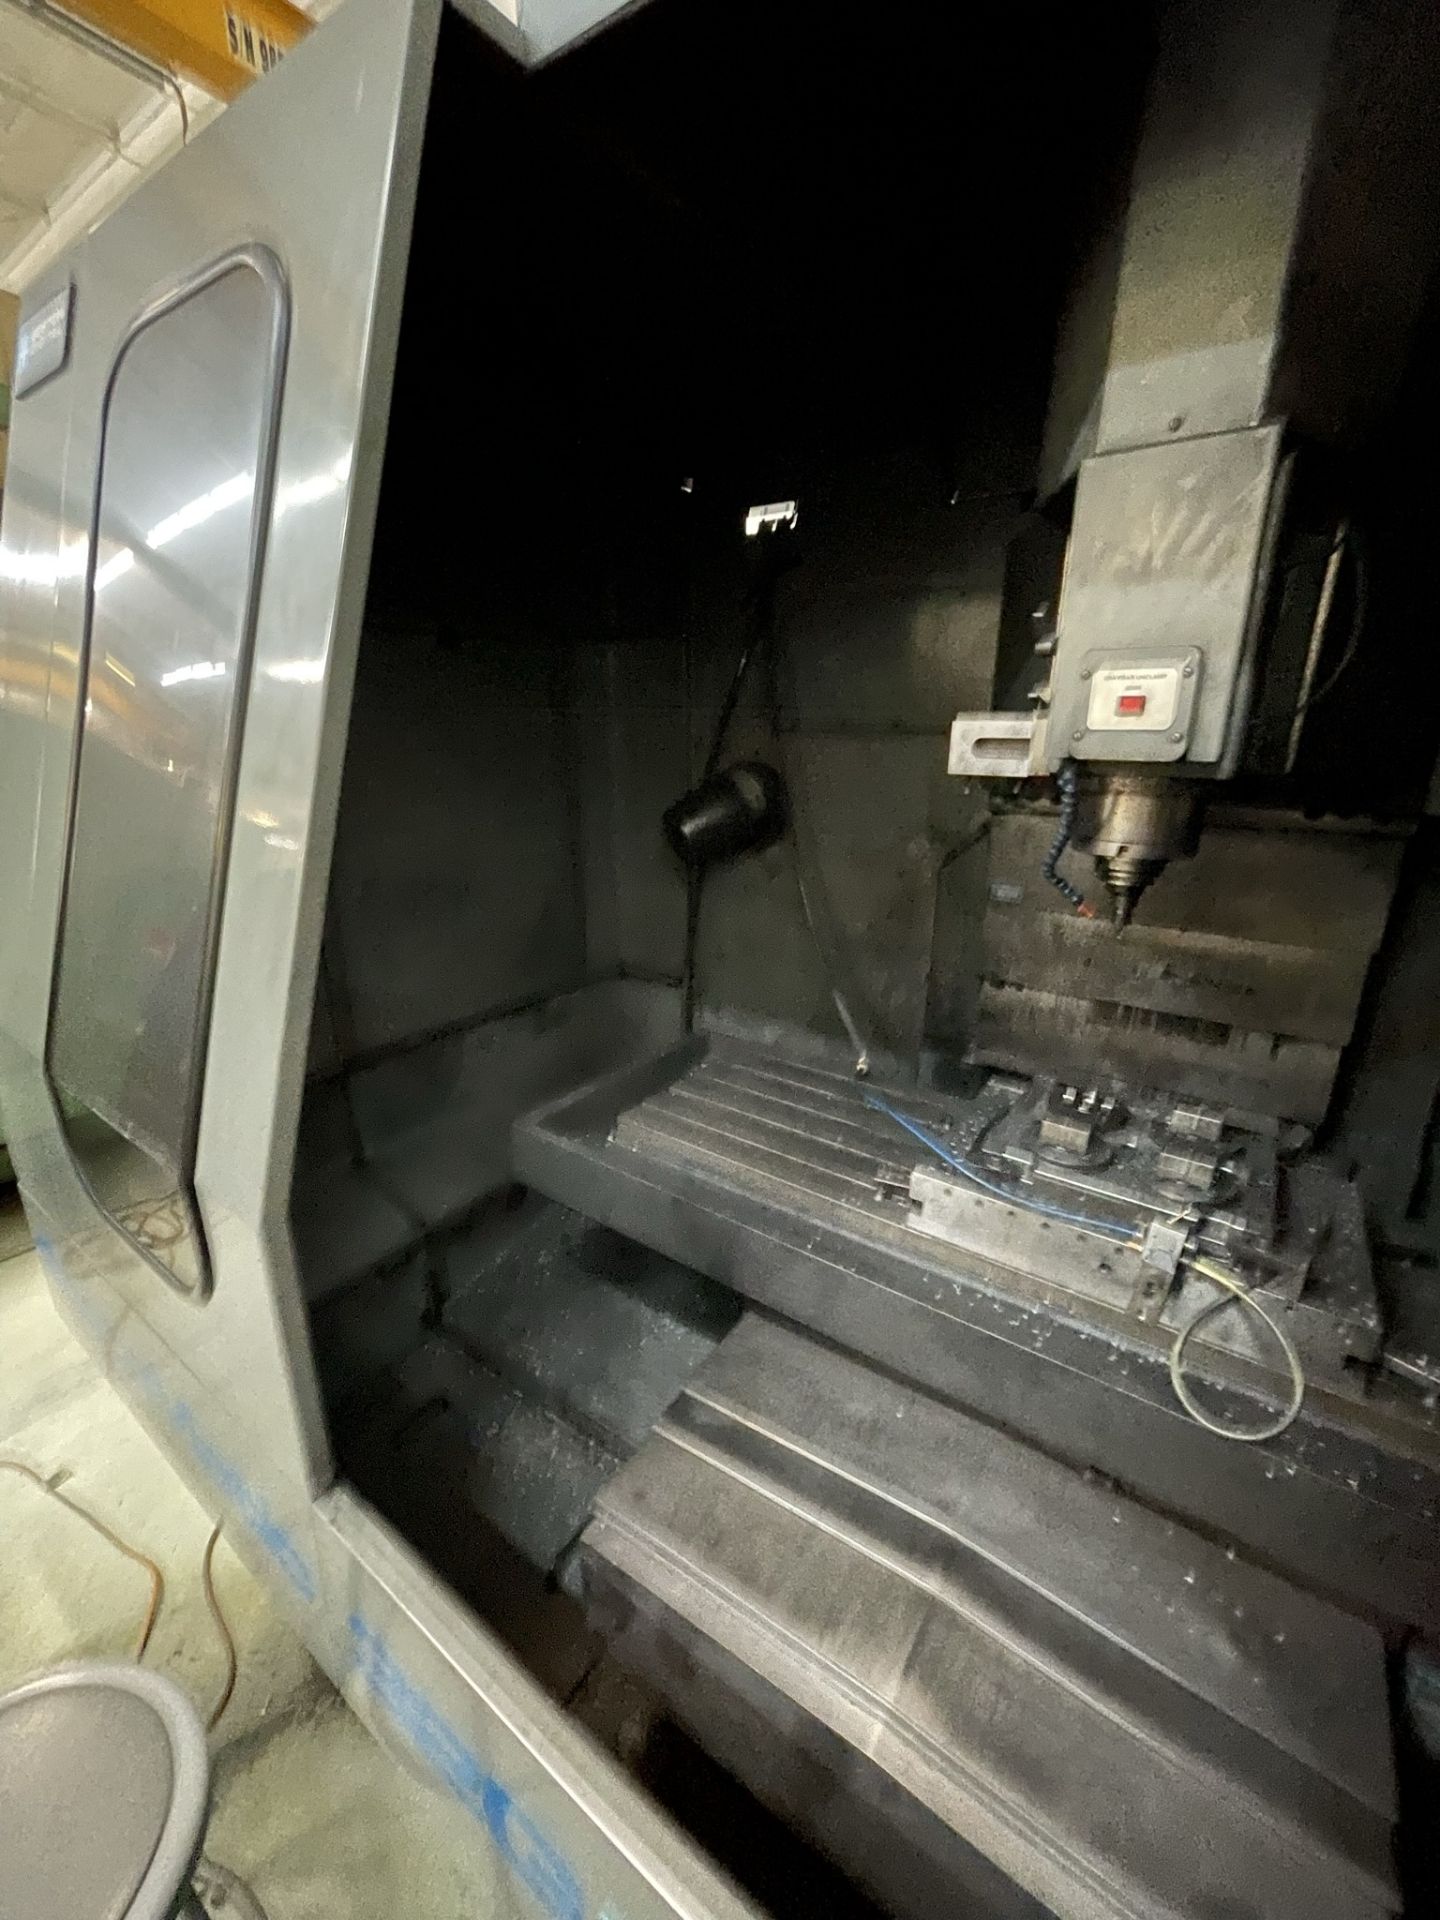 1995 Bostomatic BD32-G CNC Vertical Machining Center - Image 4 of 7